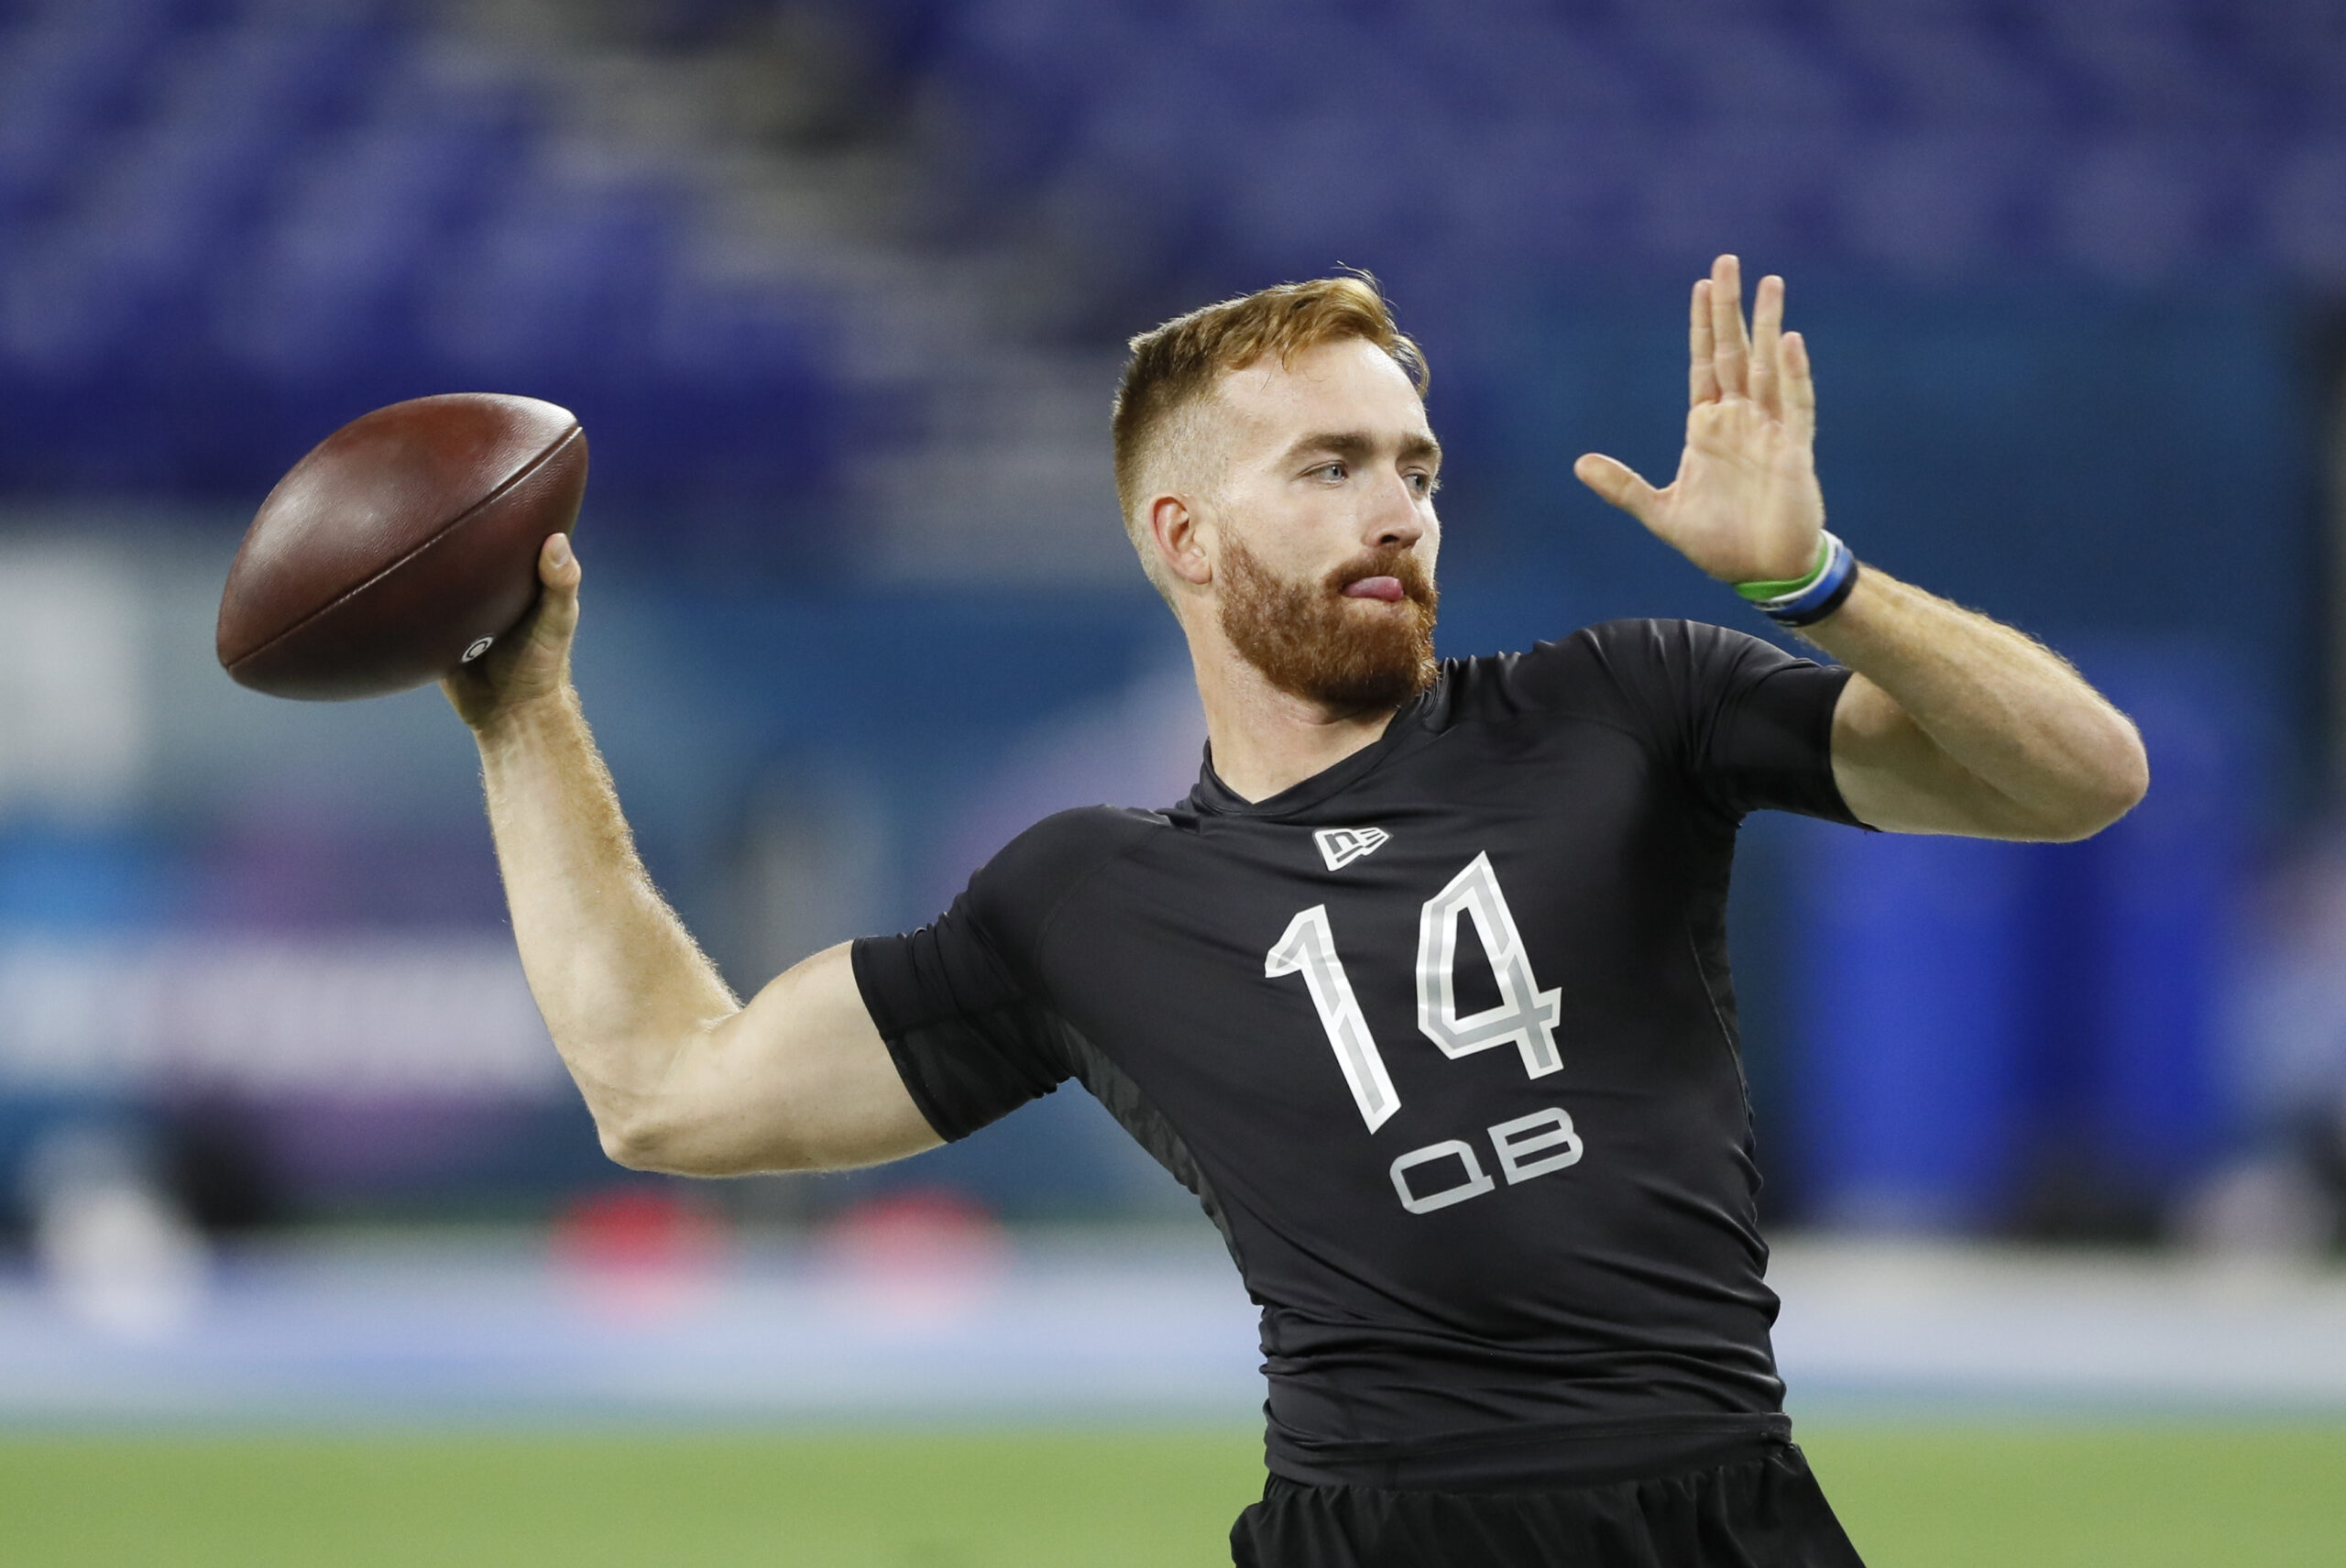 James Morgan throws at the 2020 NFL Combine